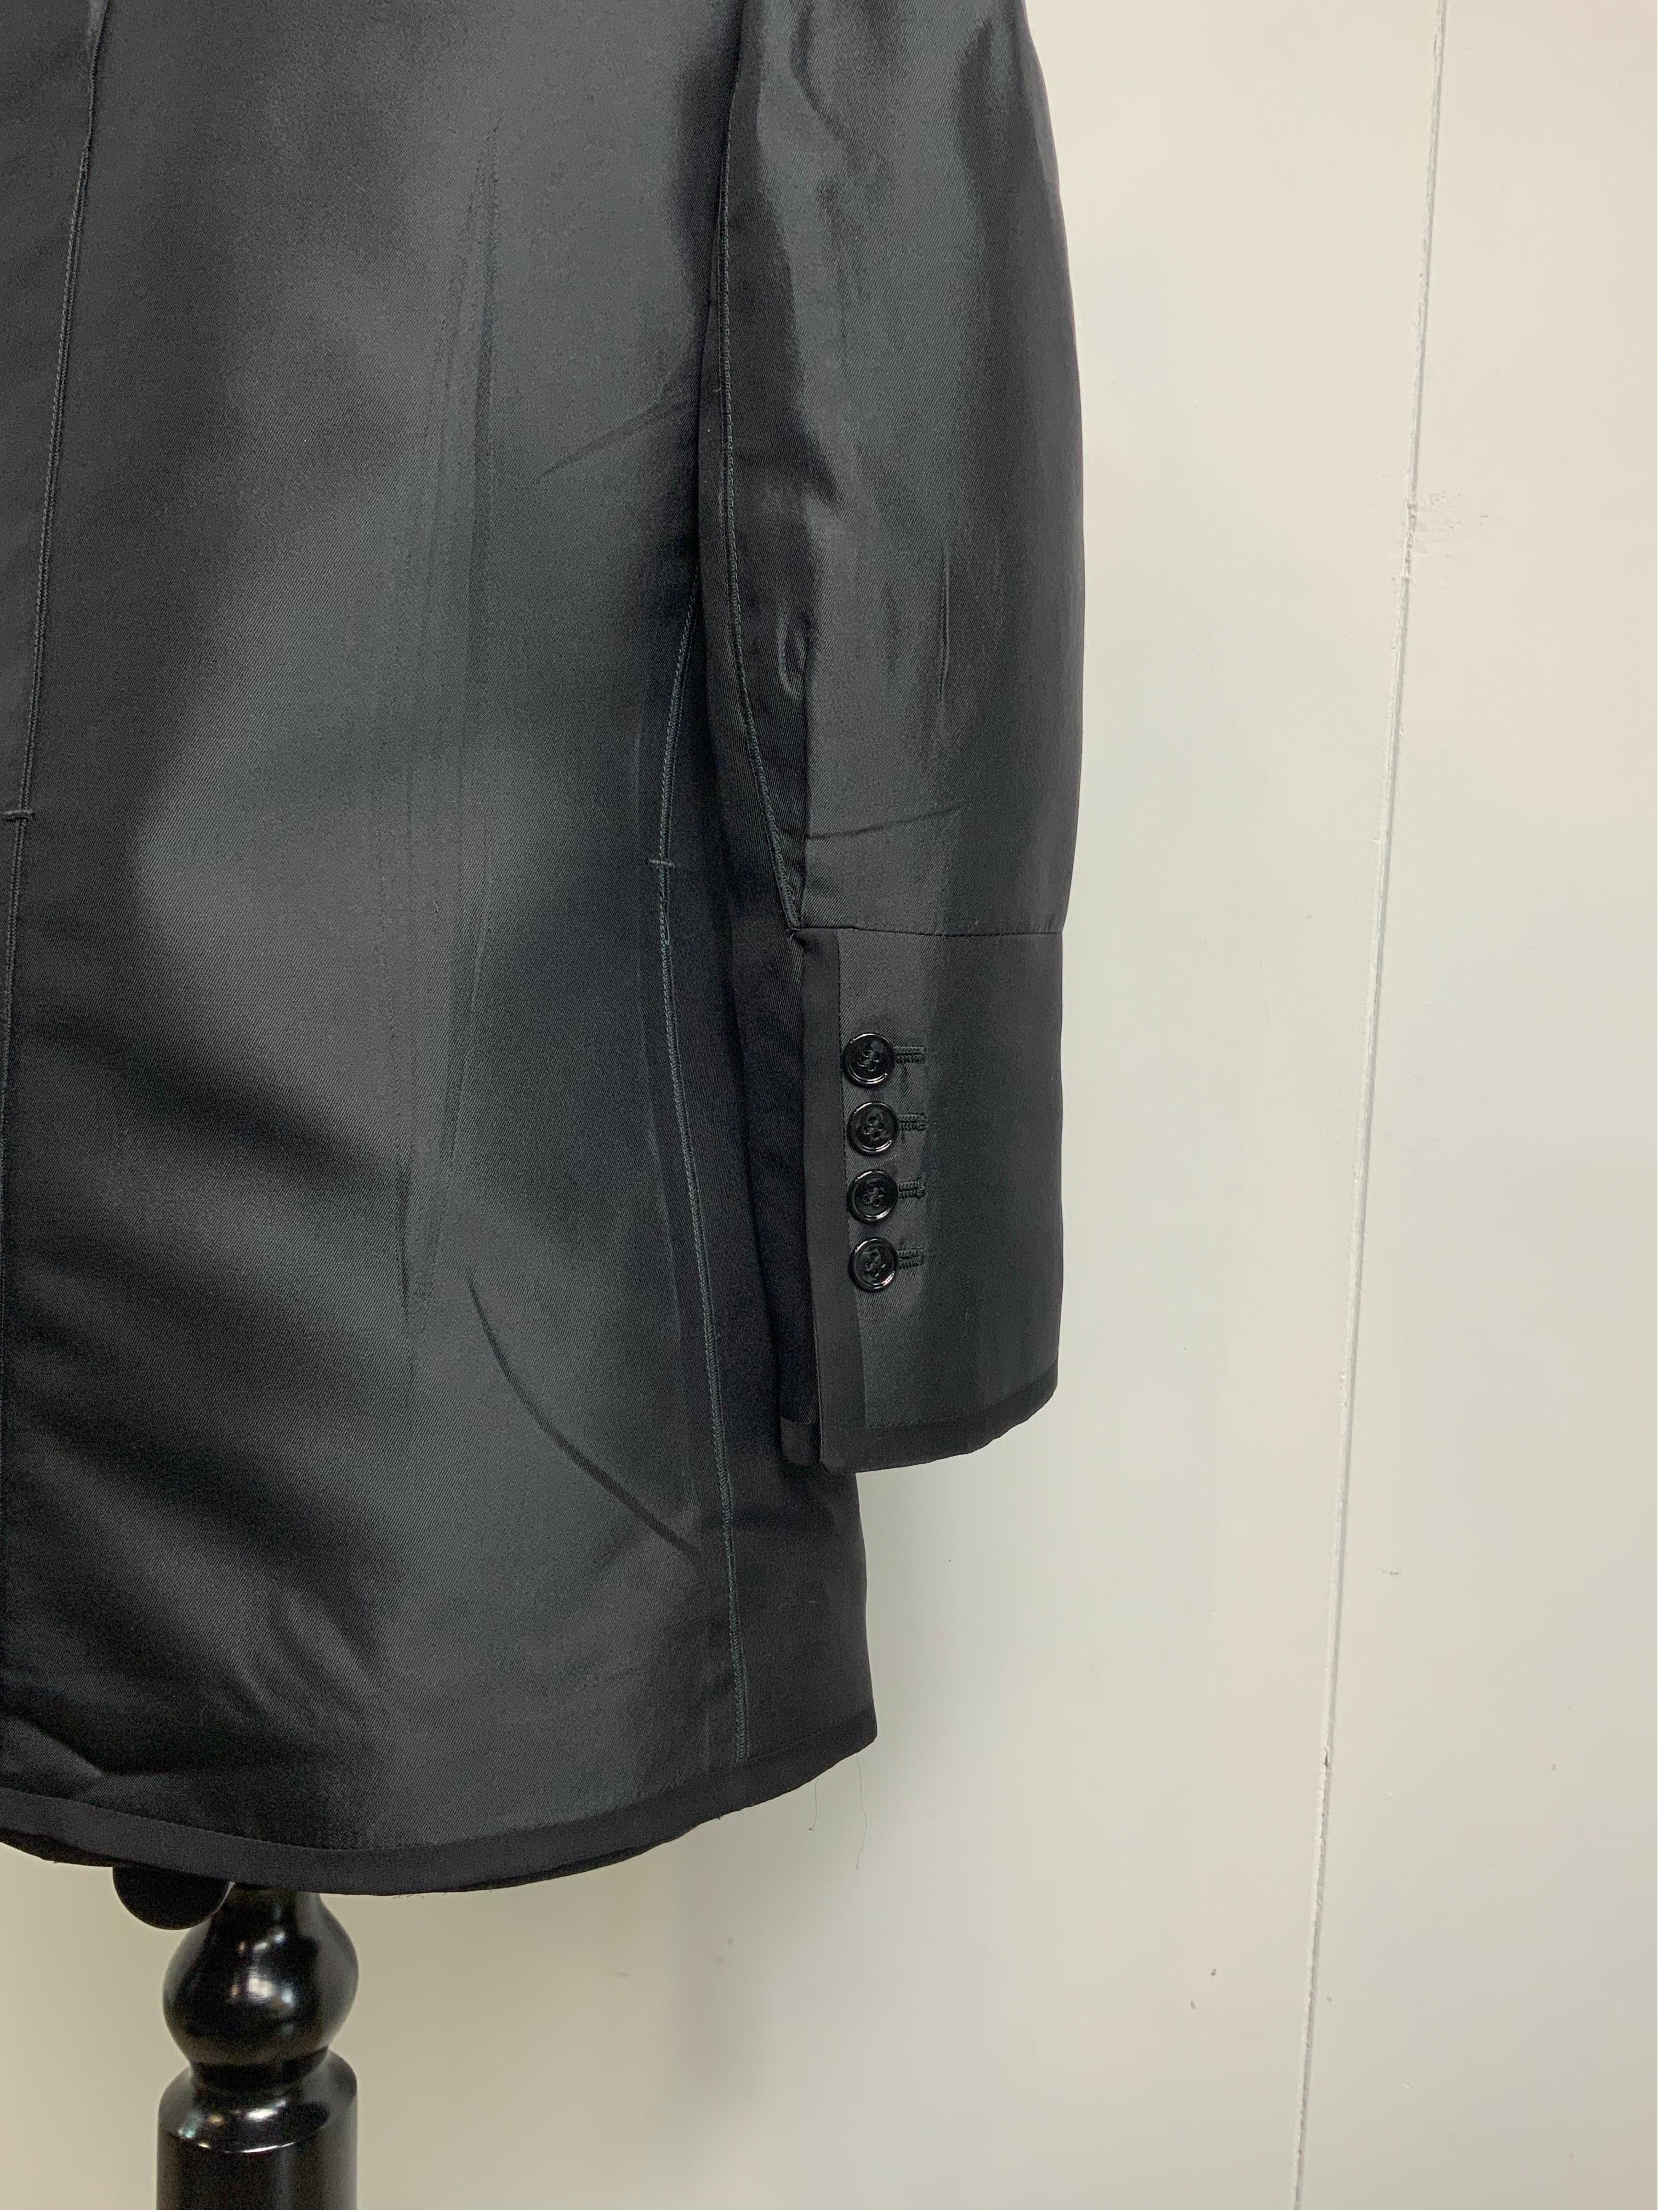 Dolce and Gabbana Black Skirt + jacket Suit For Sale 1